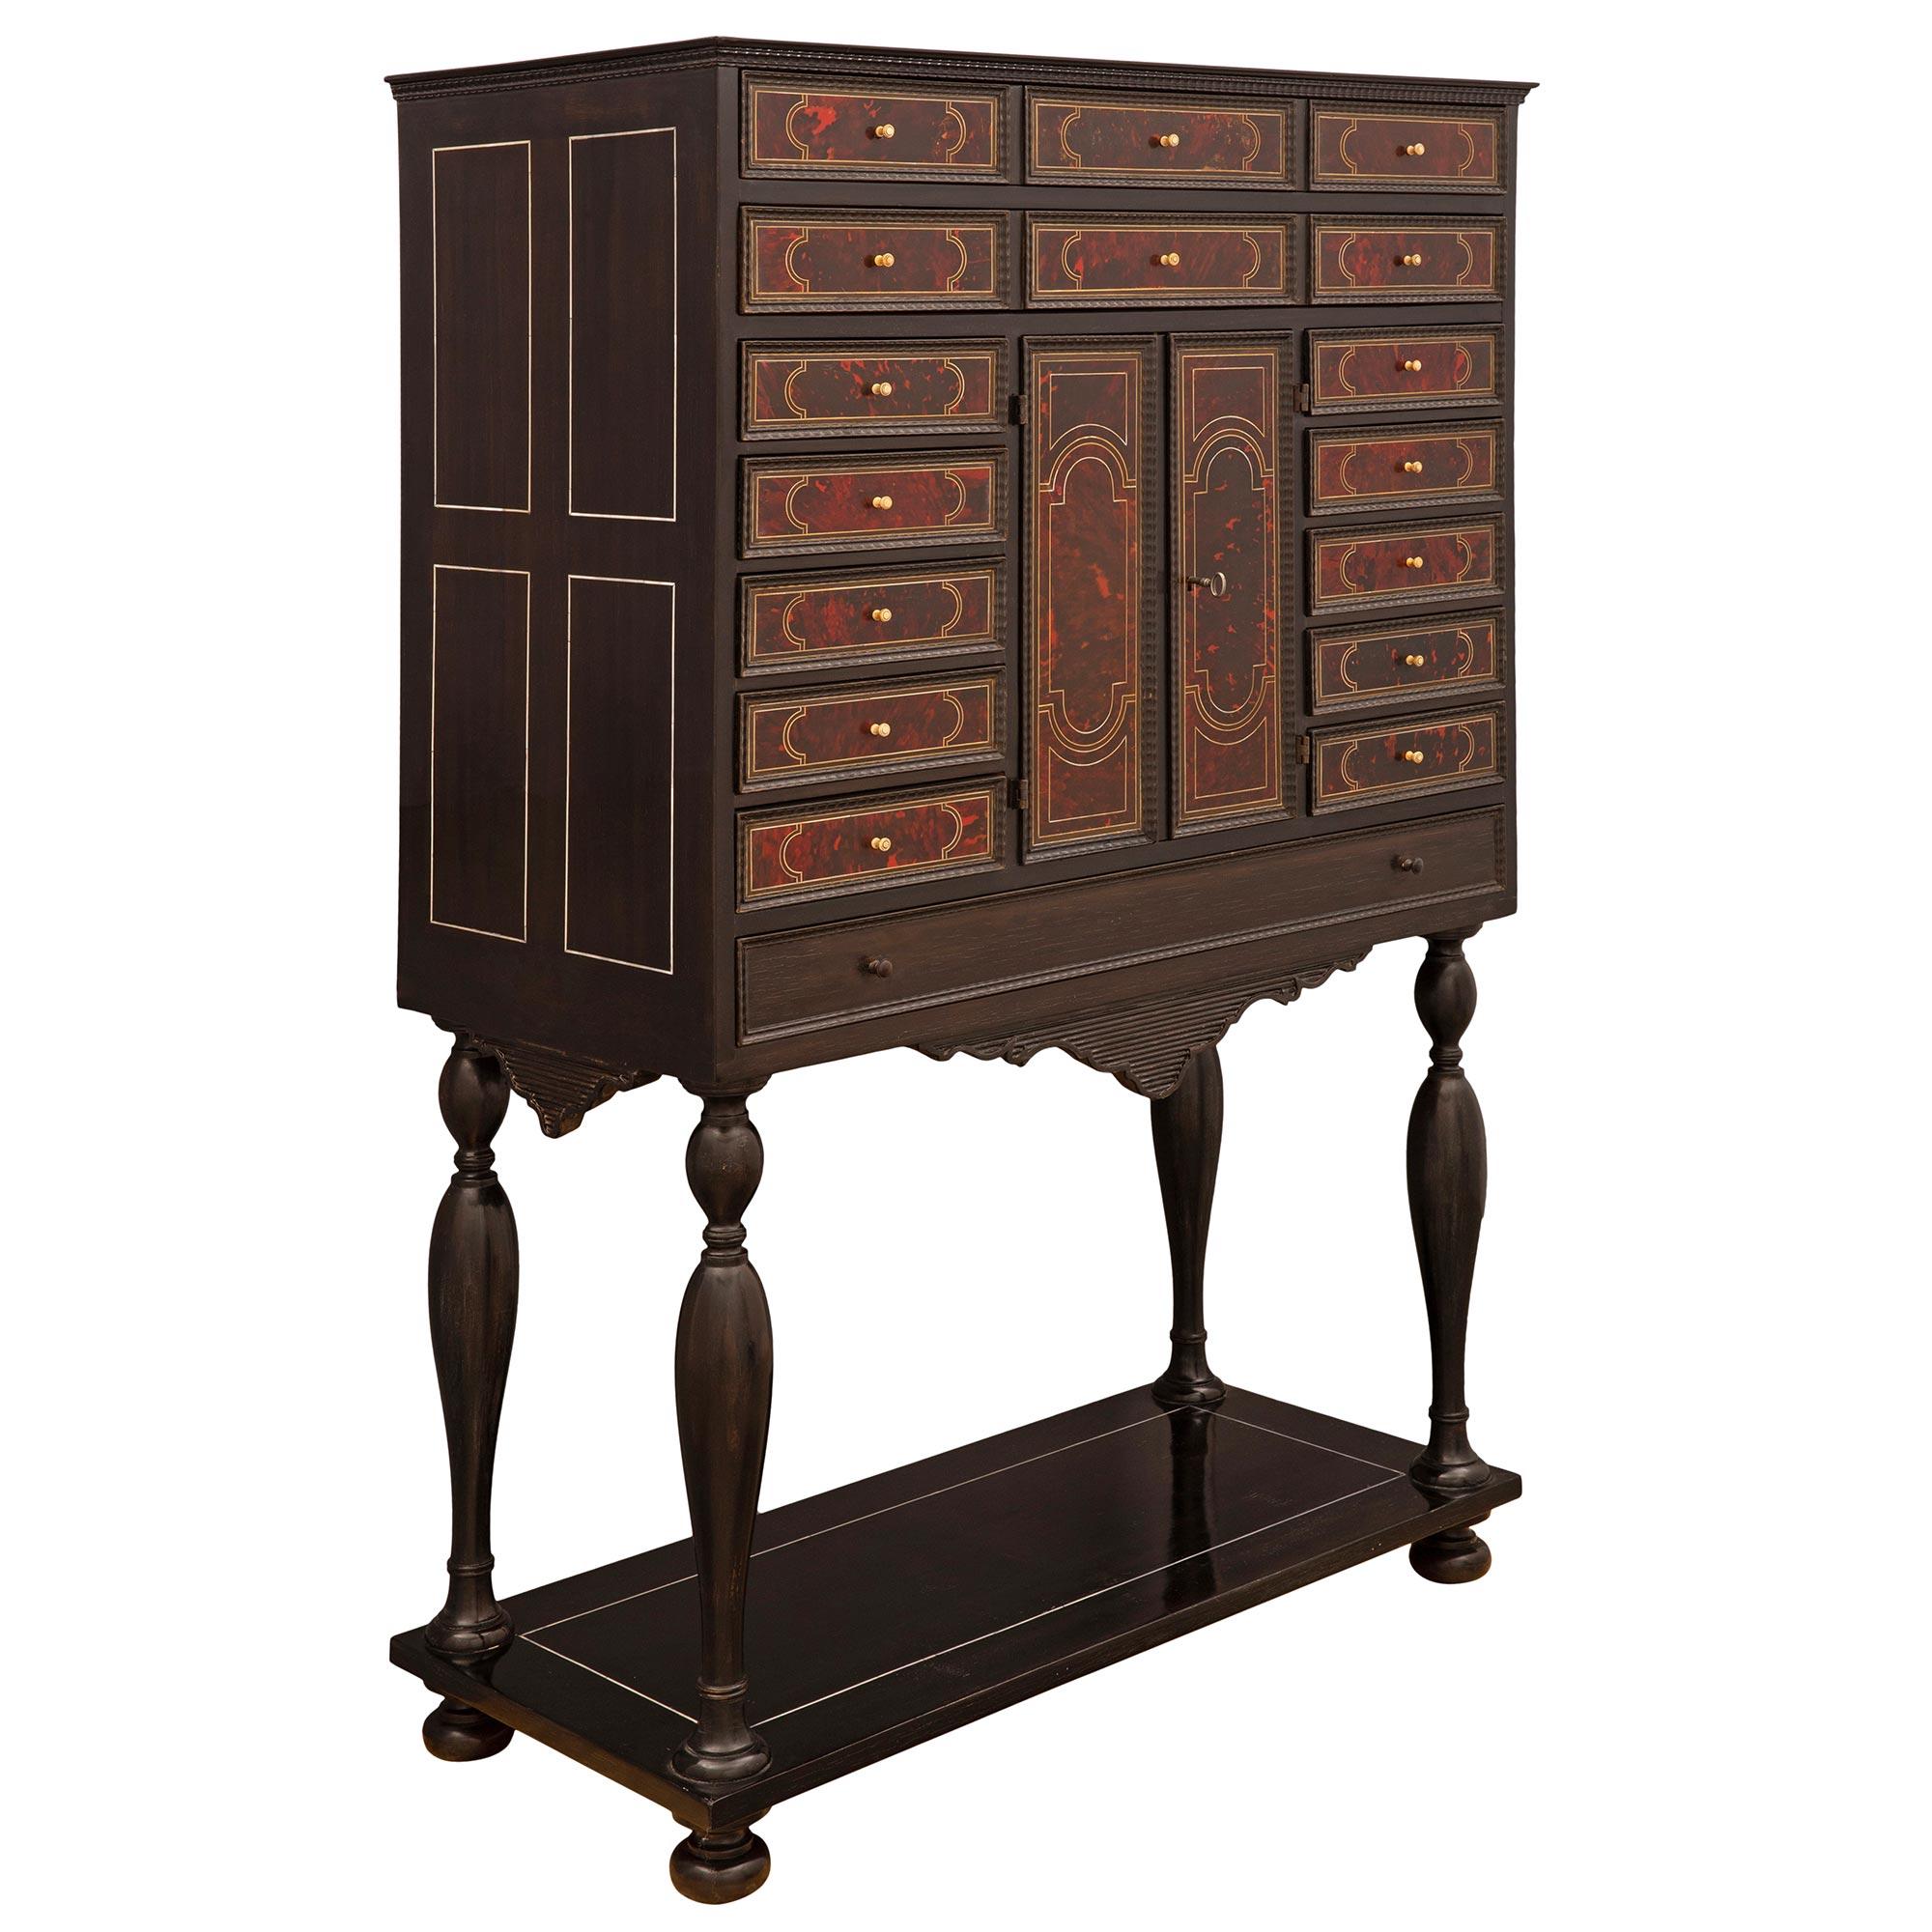 Italian Early 19th Century Ebony, Tortoiseshell and Bone Specimen Cabinet In Good Condition For Sale In West Palm Beach, FL